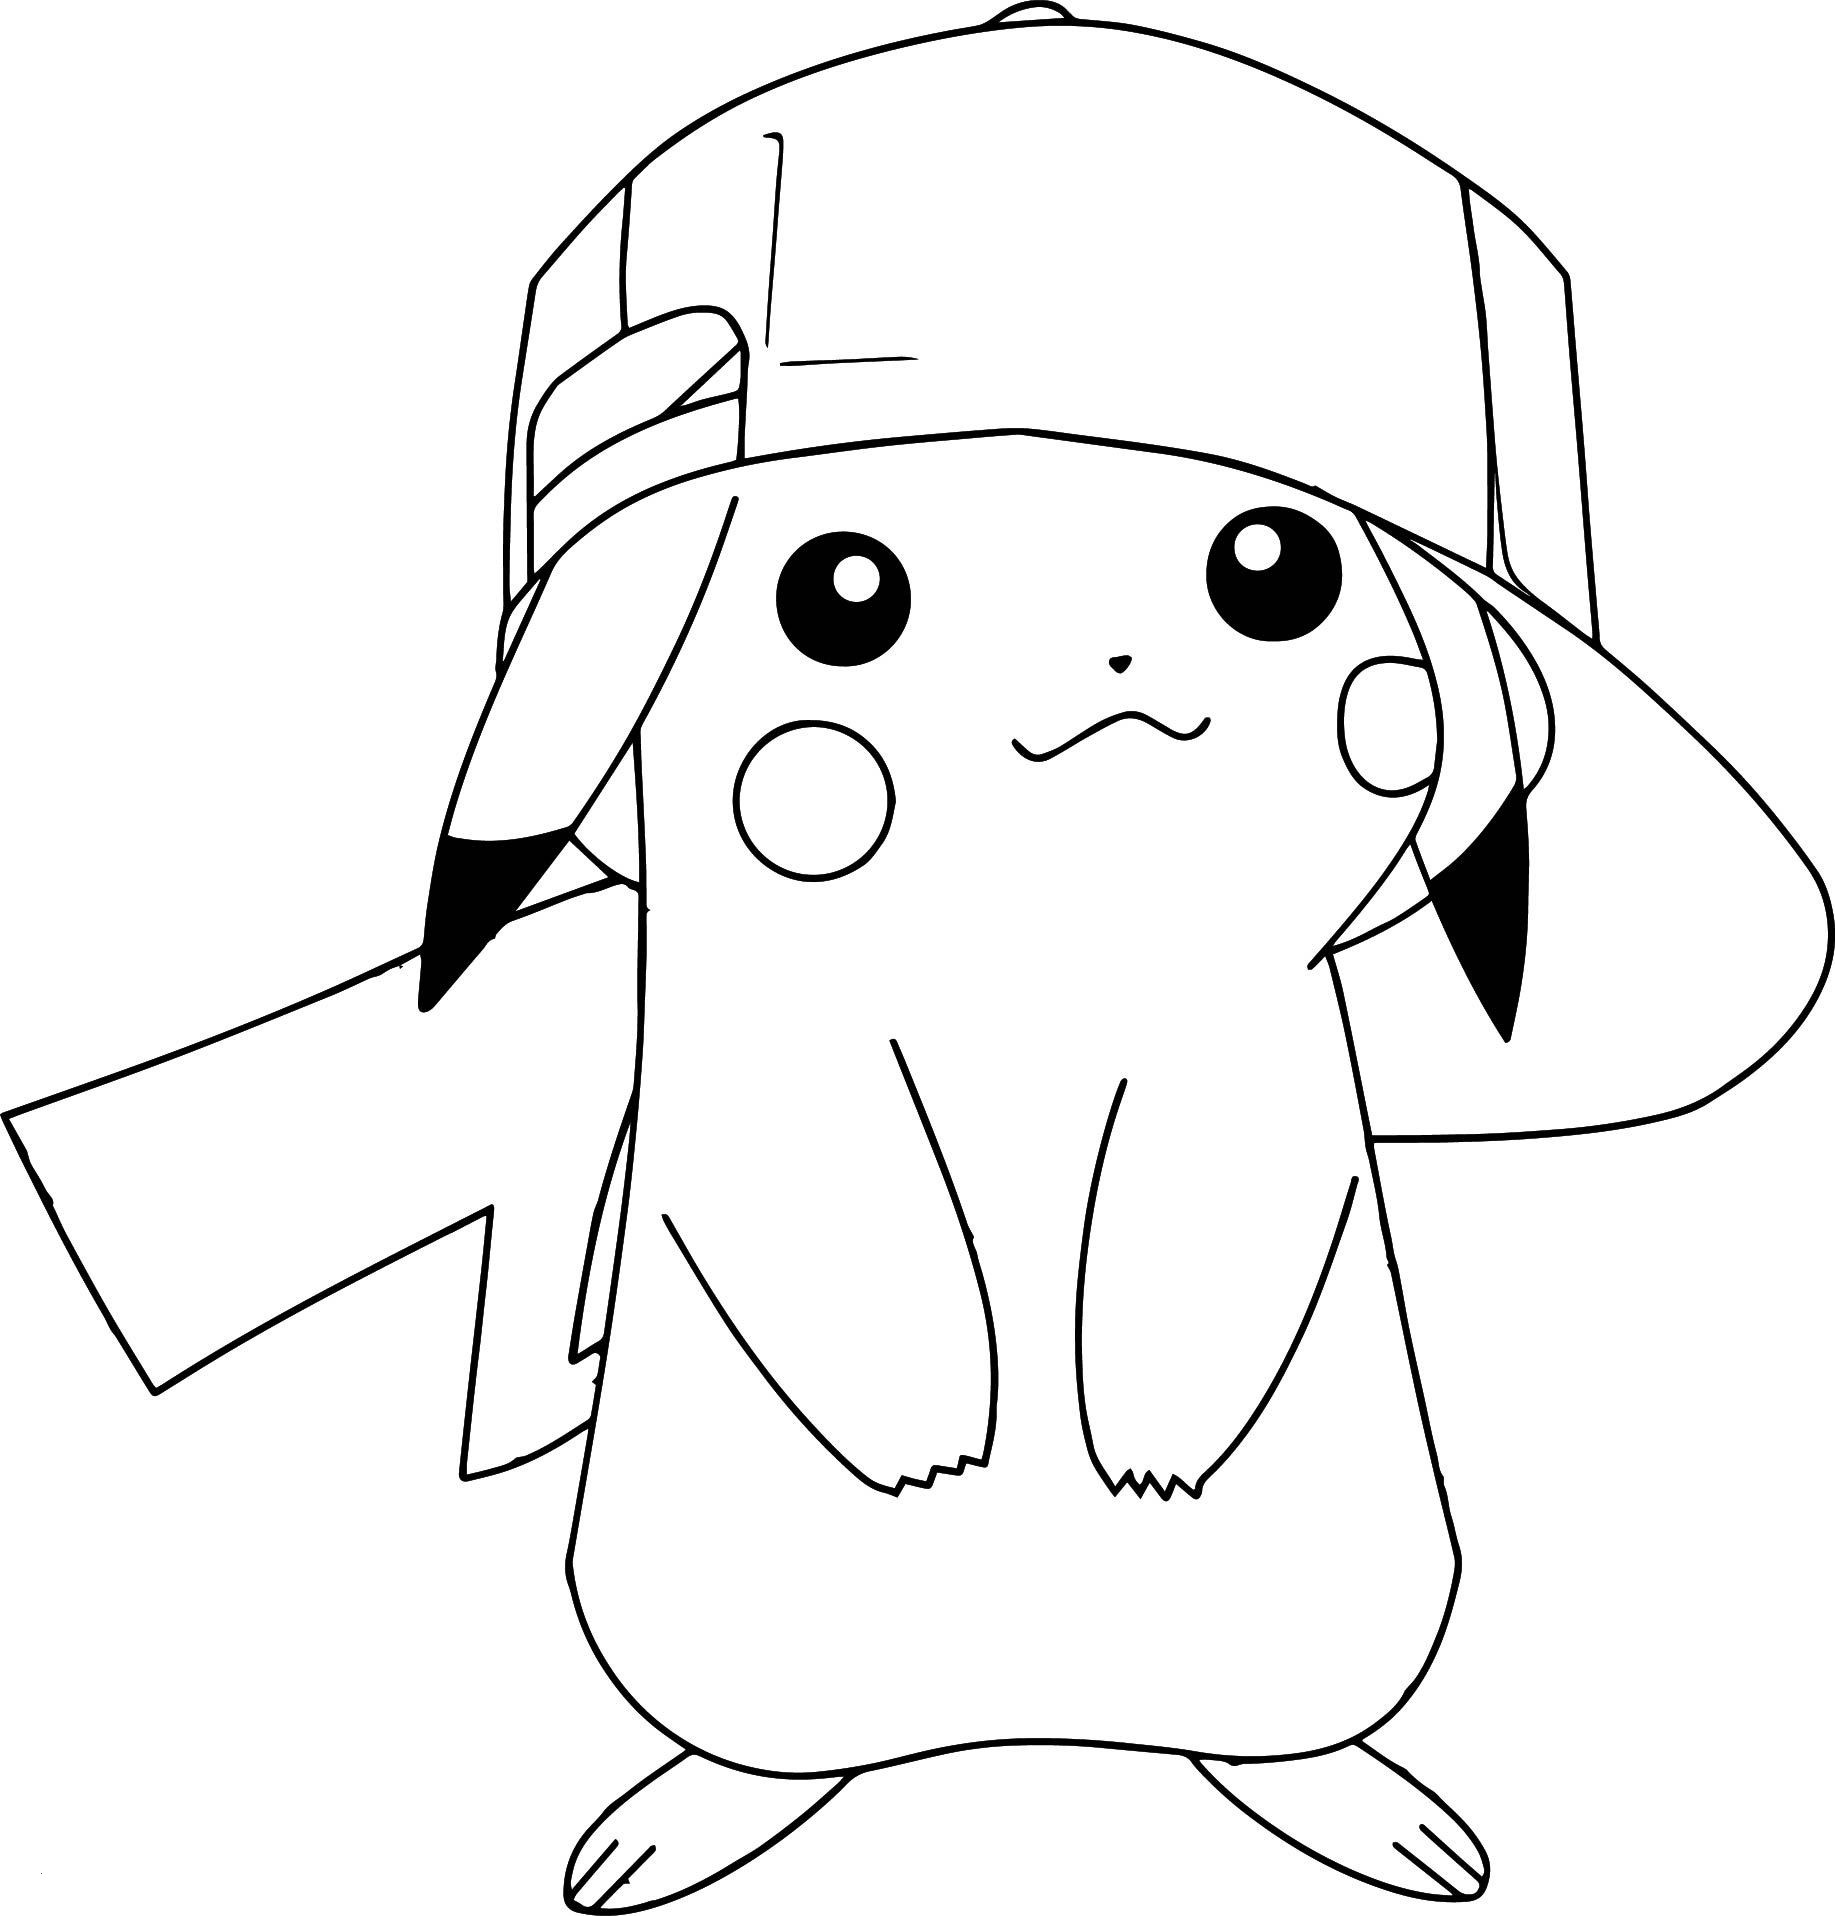 Pokemon Coloring Pages Pikachu and ash Wallpaper